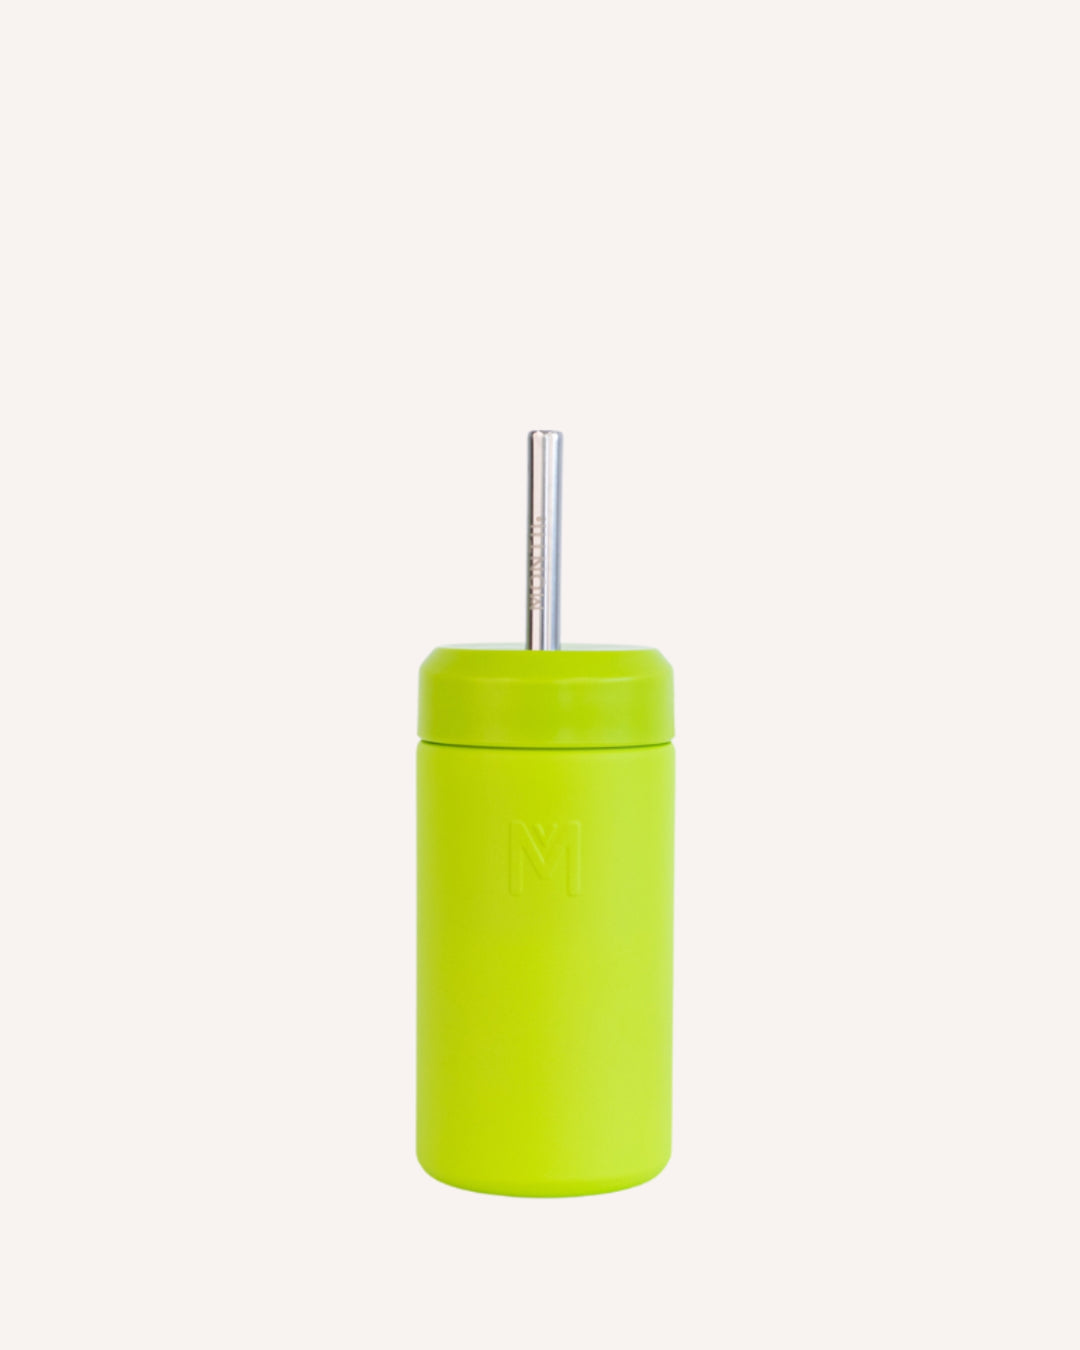 MontiiCo 350ml Smoothie Cup & Straw - Reef